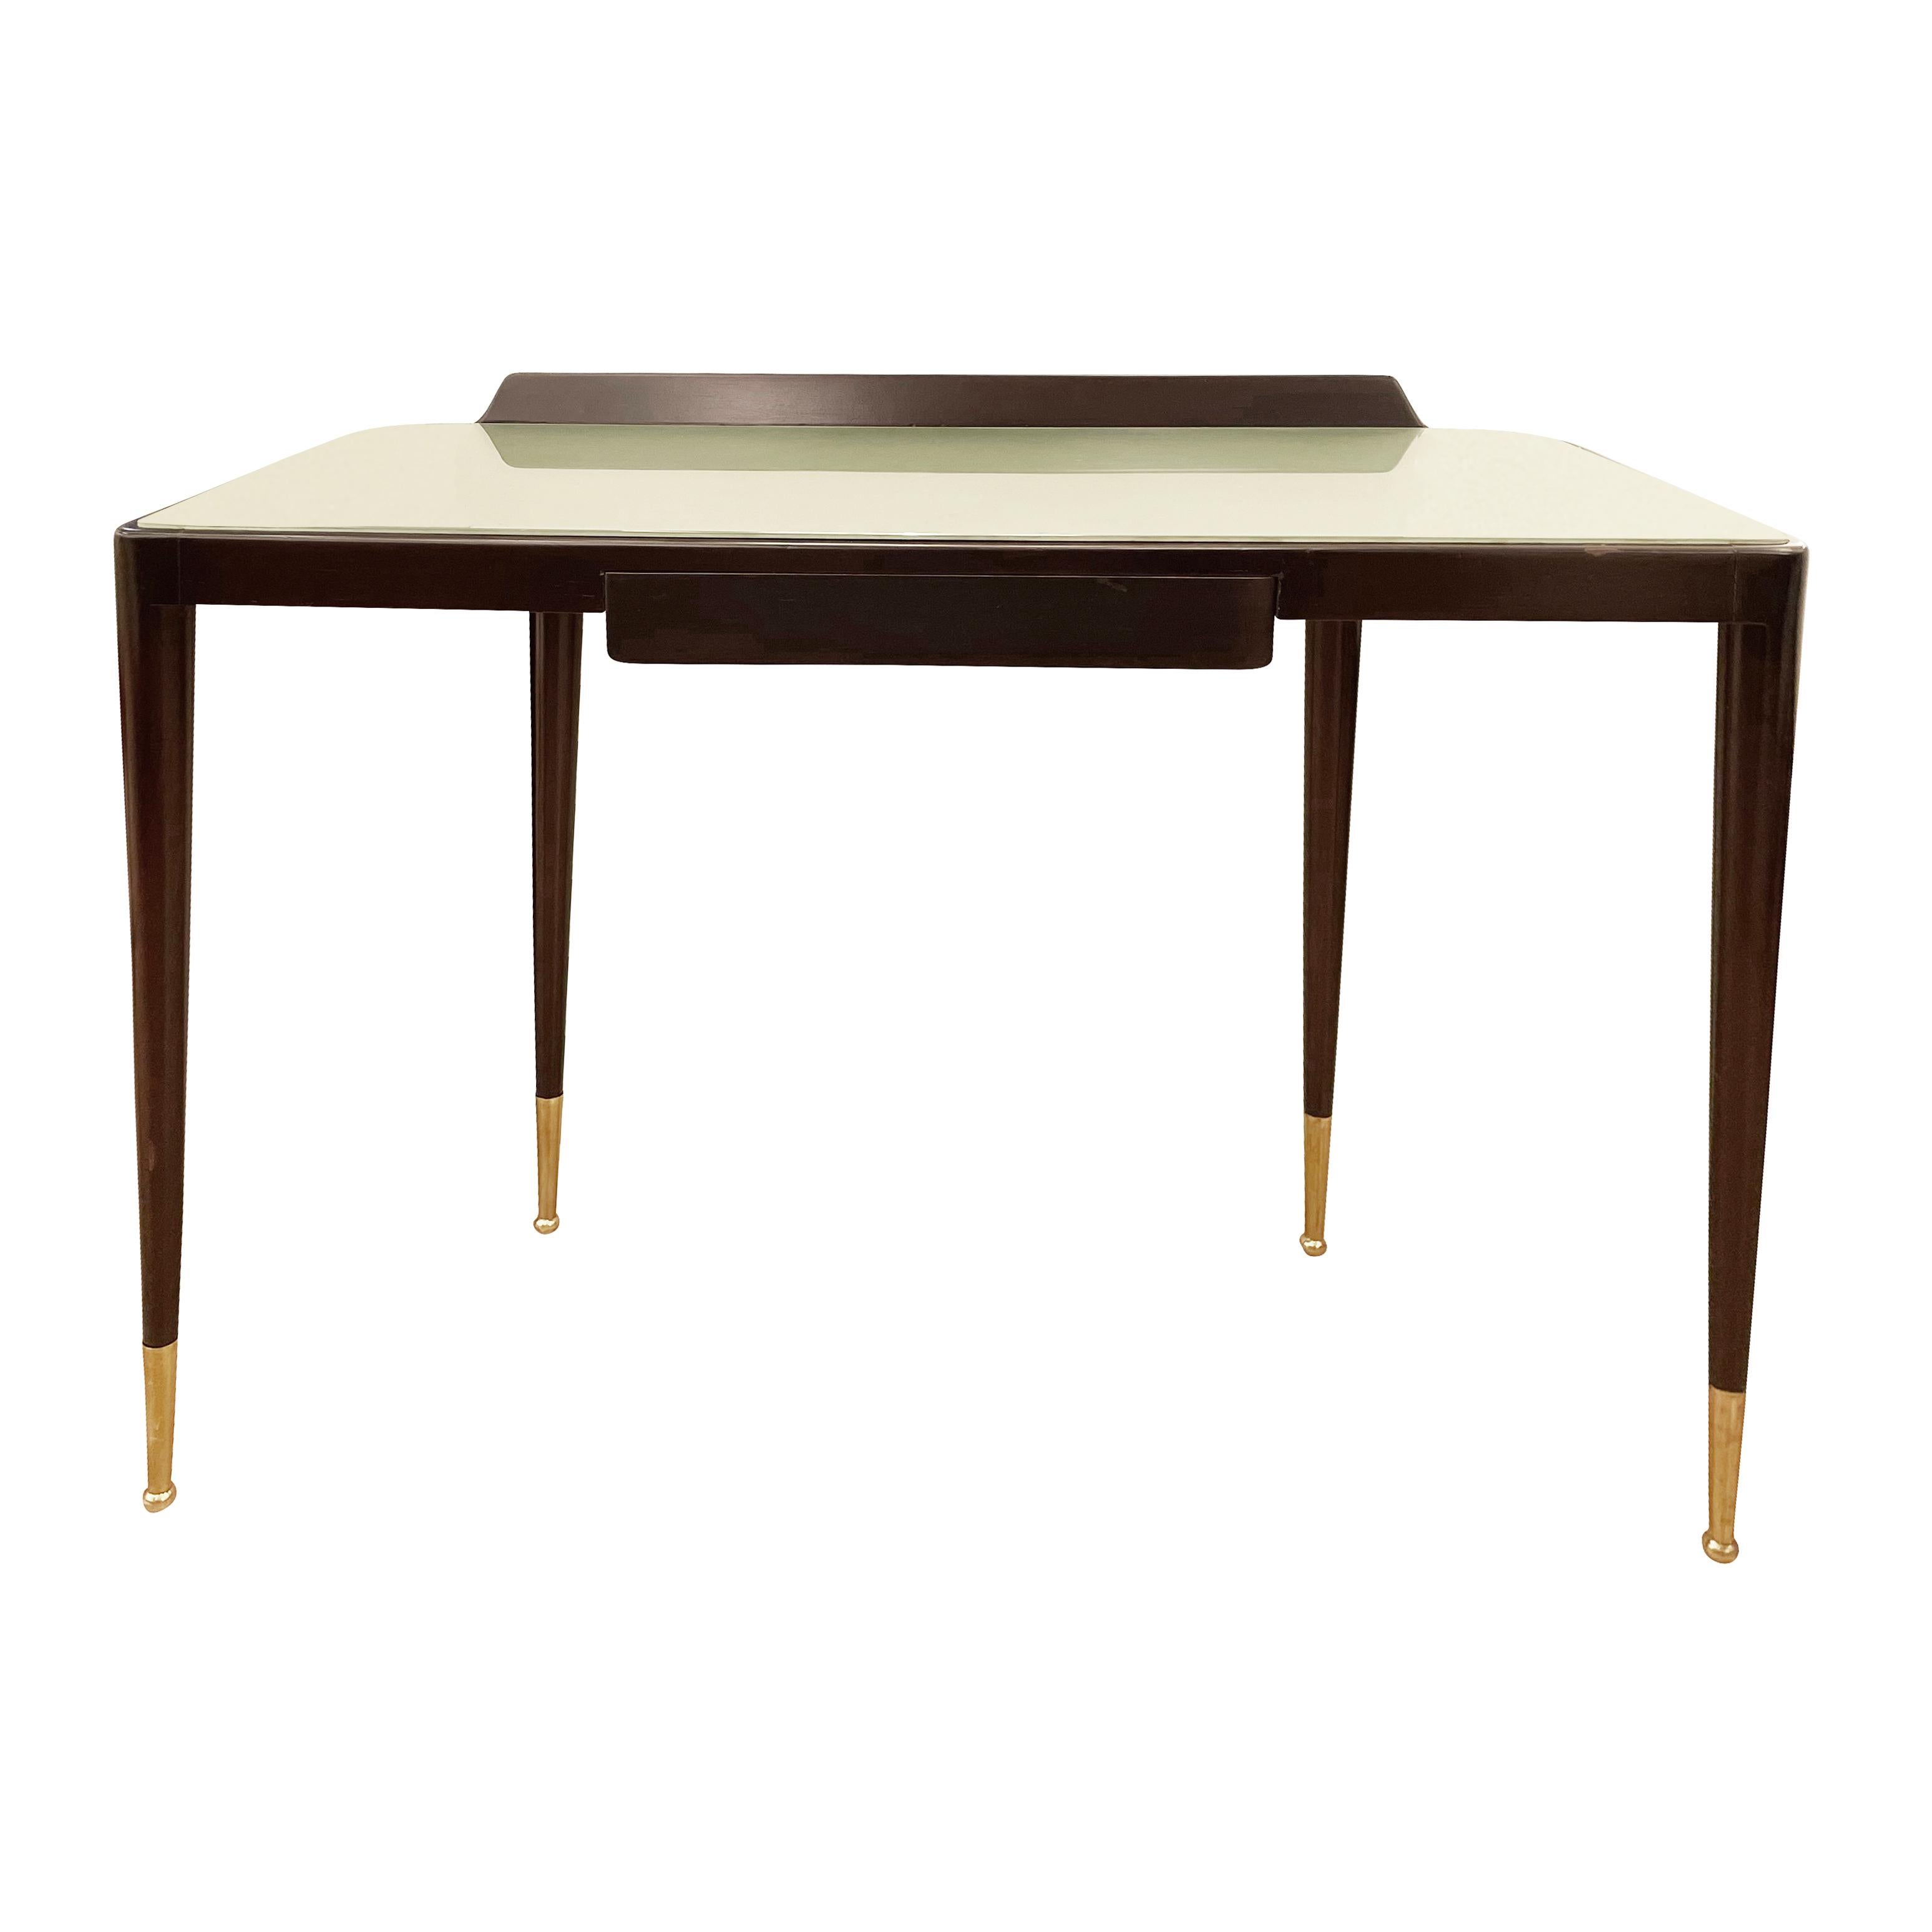 Sleek Italian Mid-Century wood console by Gio Ponti with a light green-gray glass top and brass leg caps. Has one central drawer and is finished in the back allowing it to be a freestanding piece.

Condition: Excellent vintage condition, minor wear